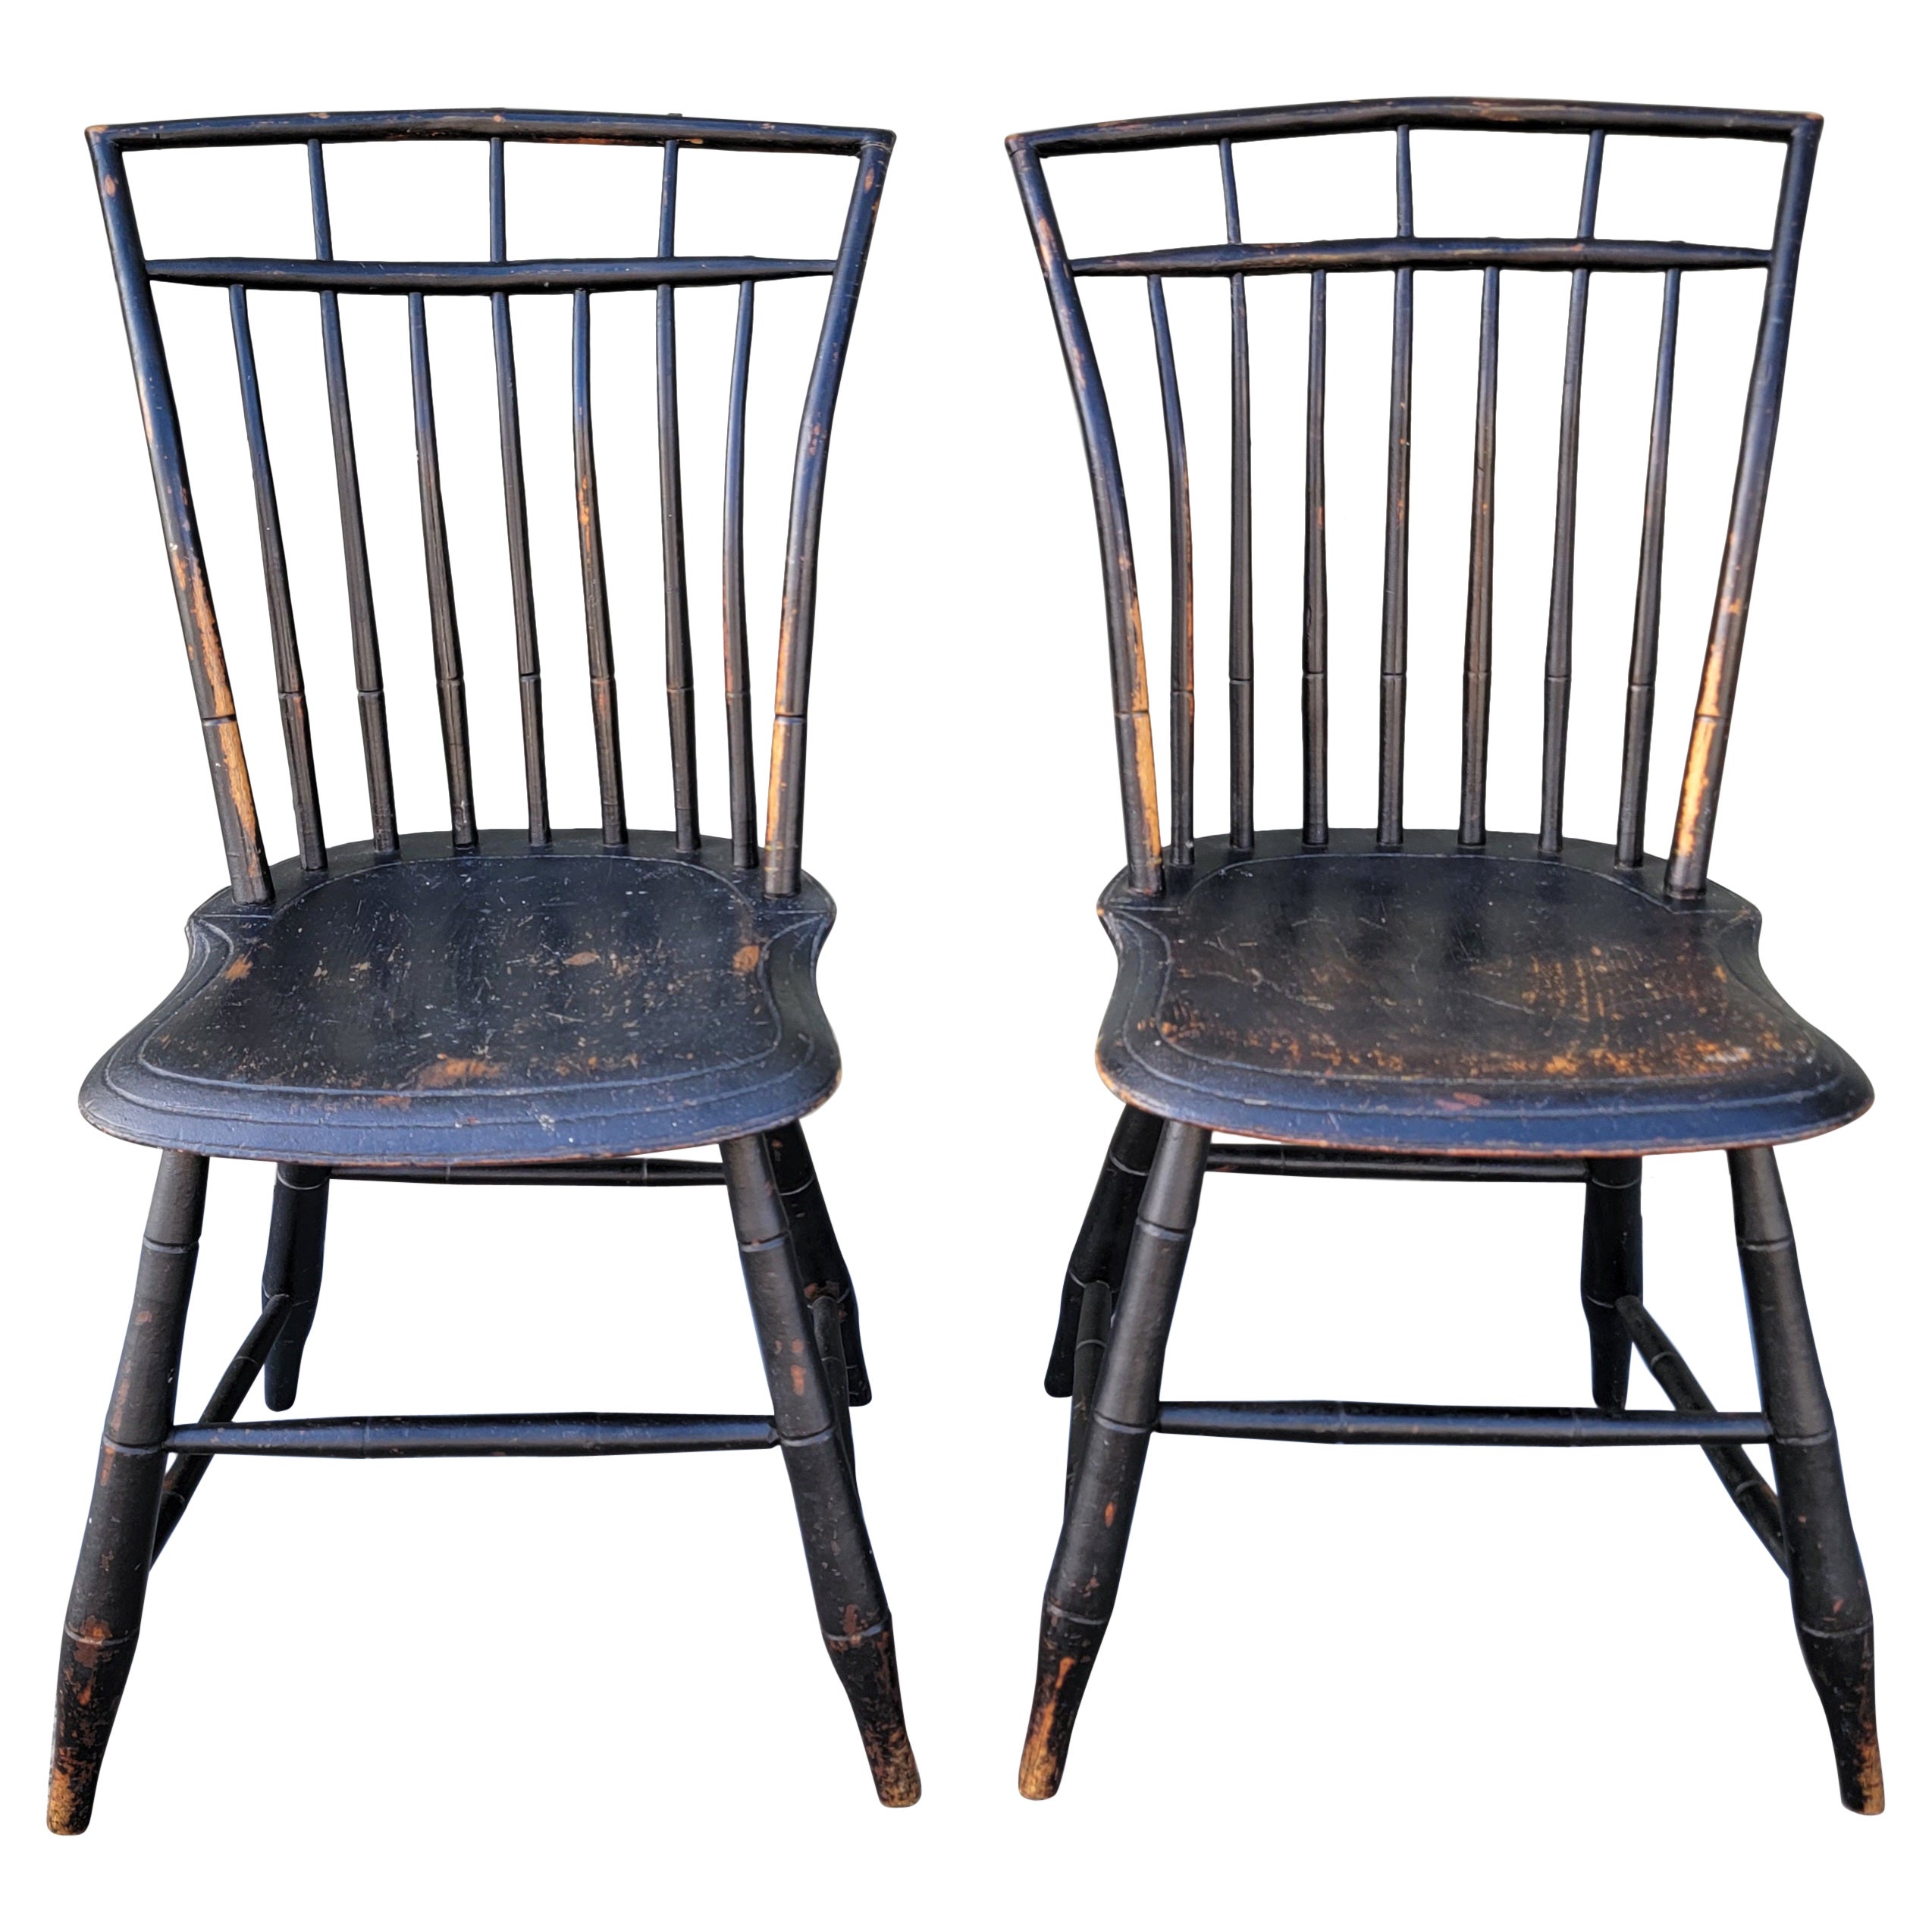 19Thc Bird Cage Windsor Chairs in Original Black Paint